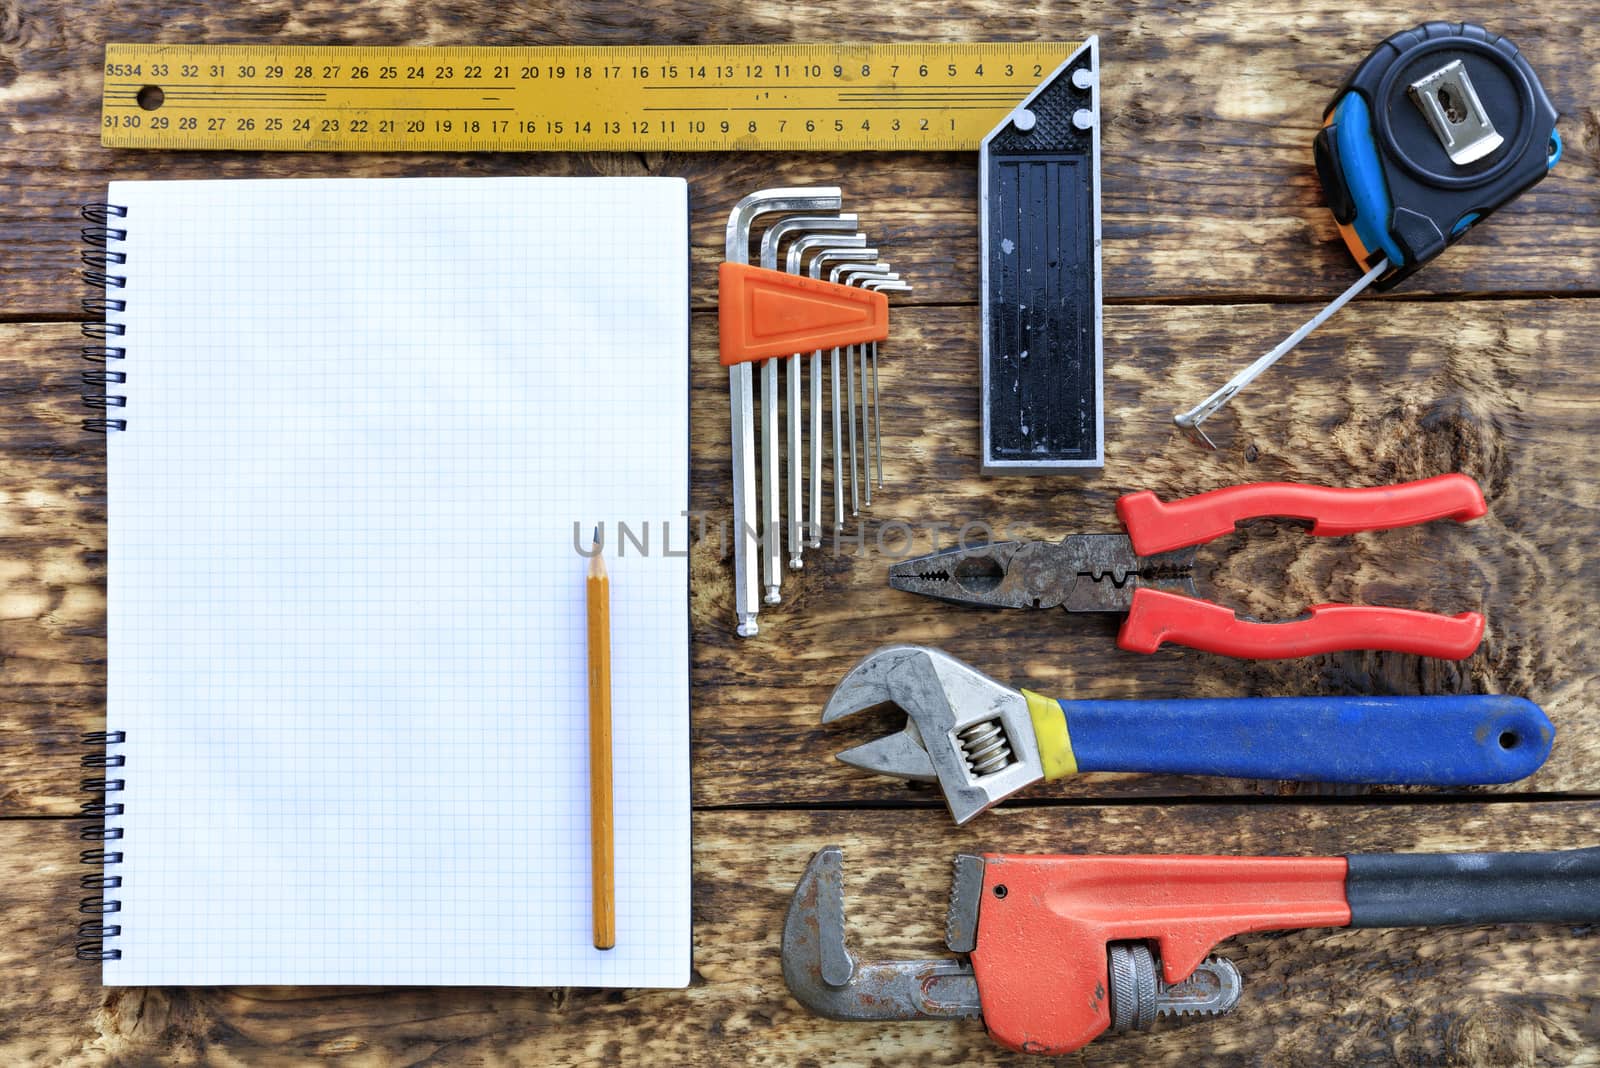 Old hand tools, pliers, tape measure, adjustable wrenches, a set of hex keys indicate an empty notebook with a pencil against the background of an old wooden table.